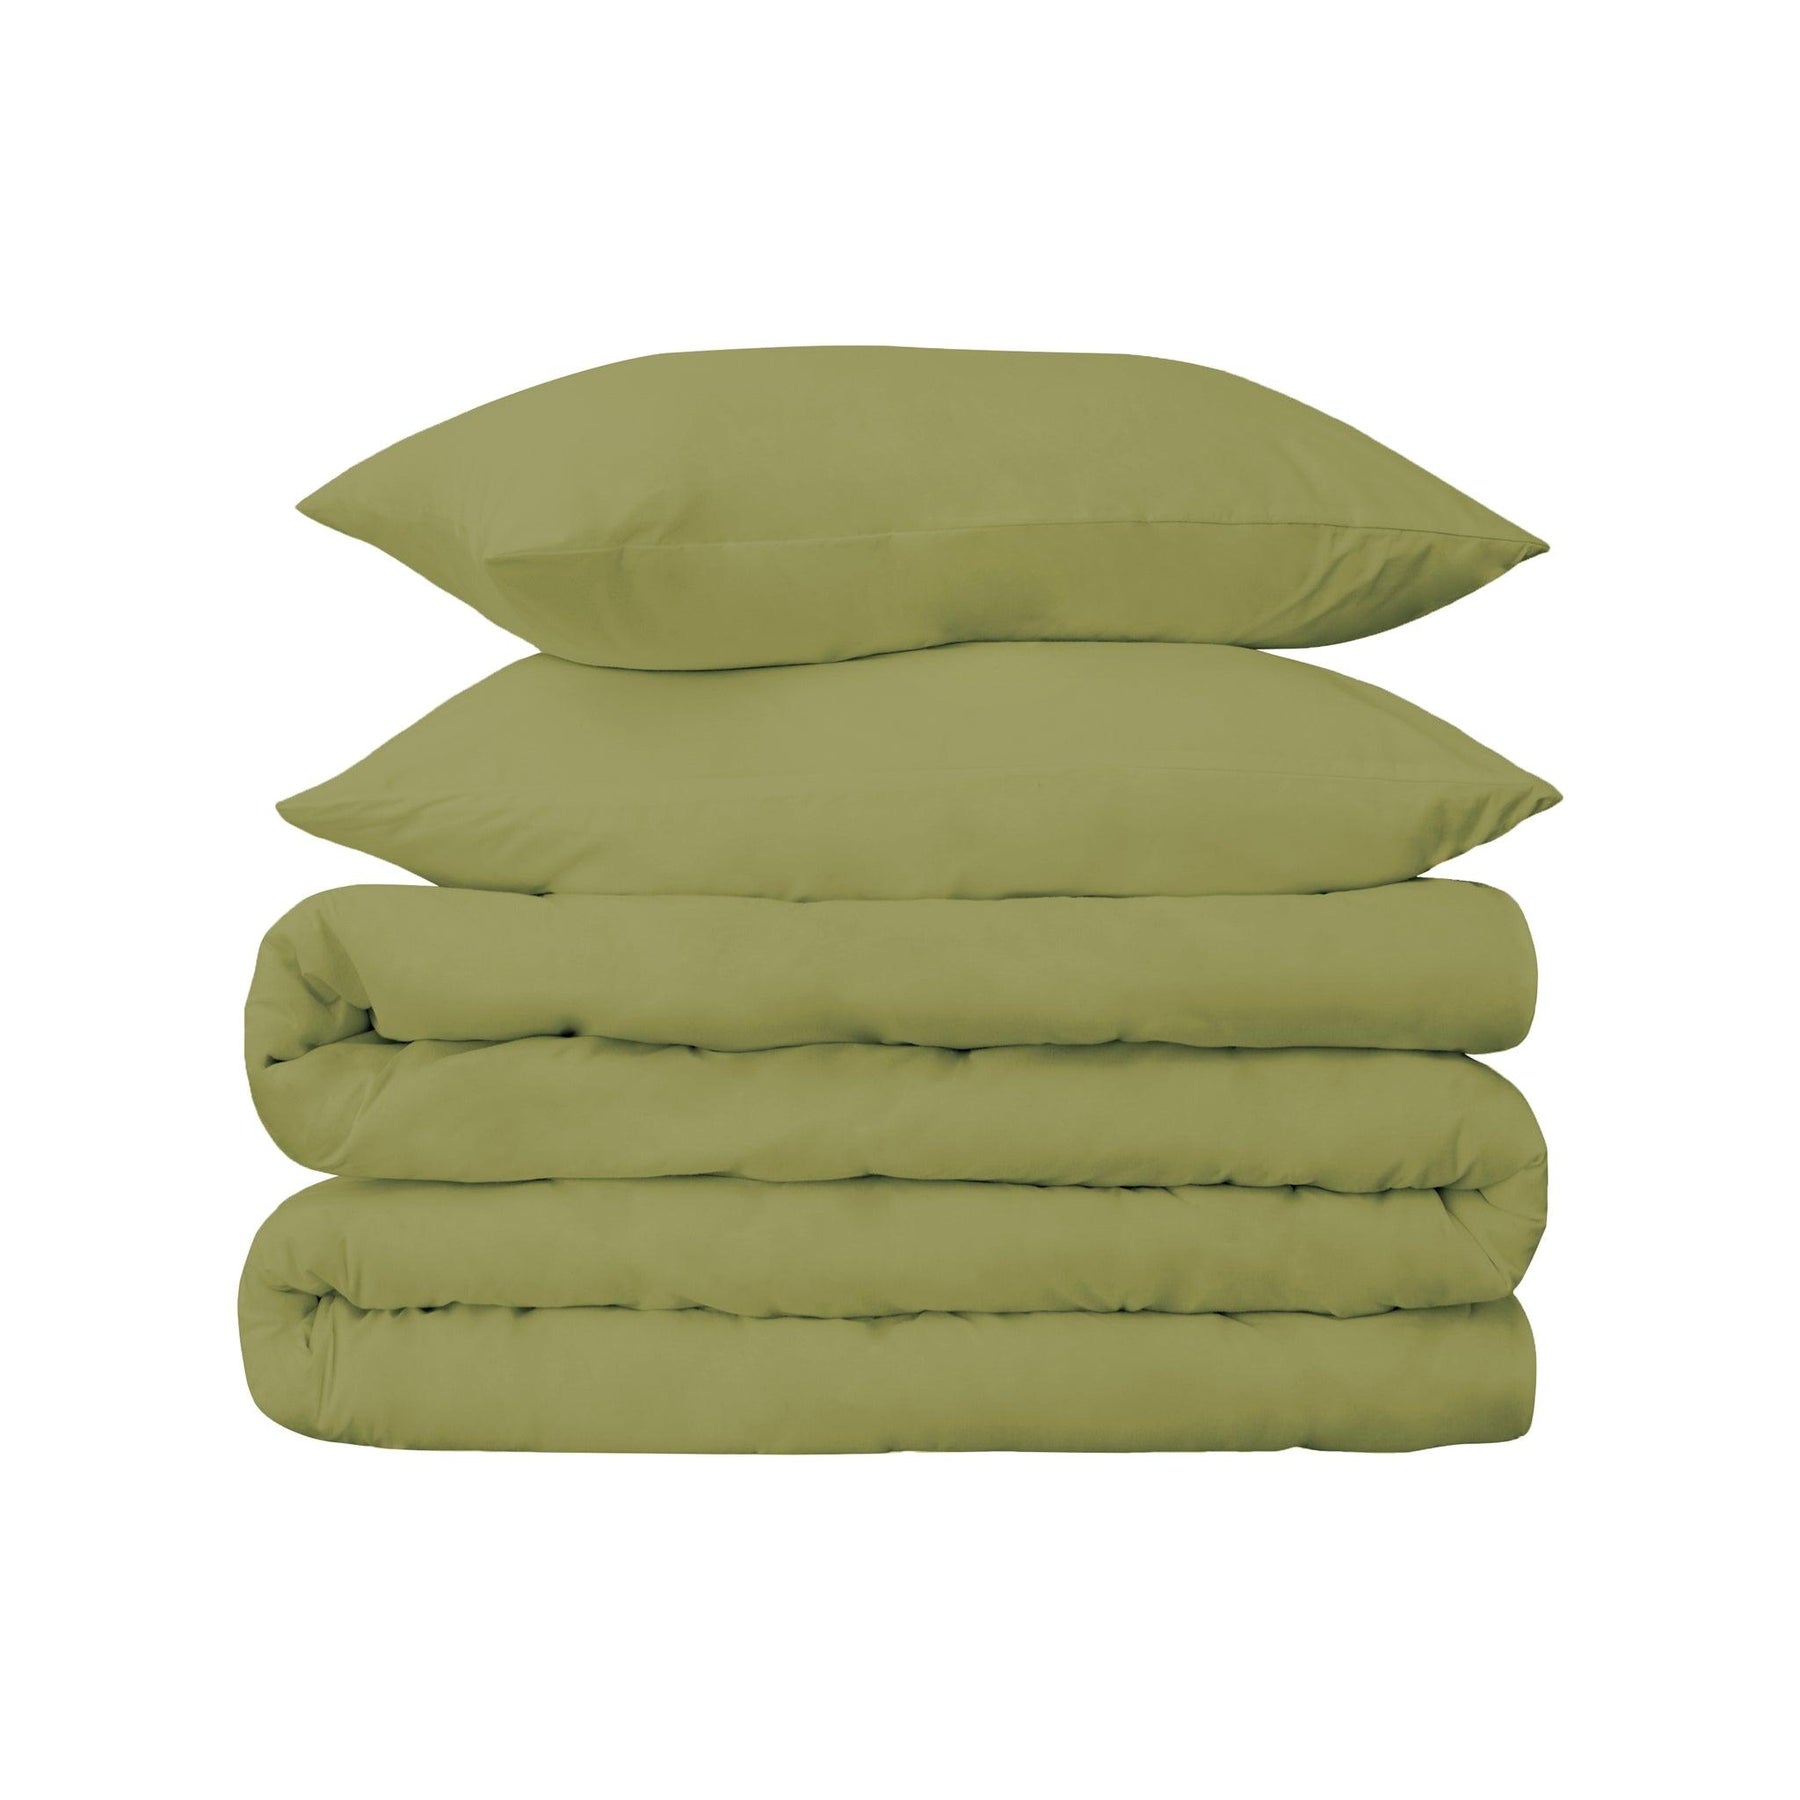  Superior Premium 650 Thread Count Egyptian Cotton Solid Duvet Cover Set - Olive Green